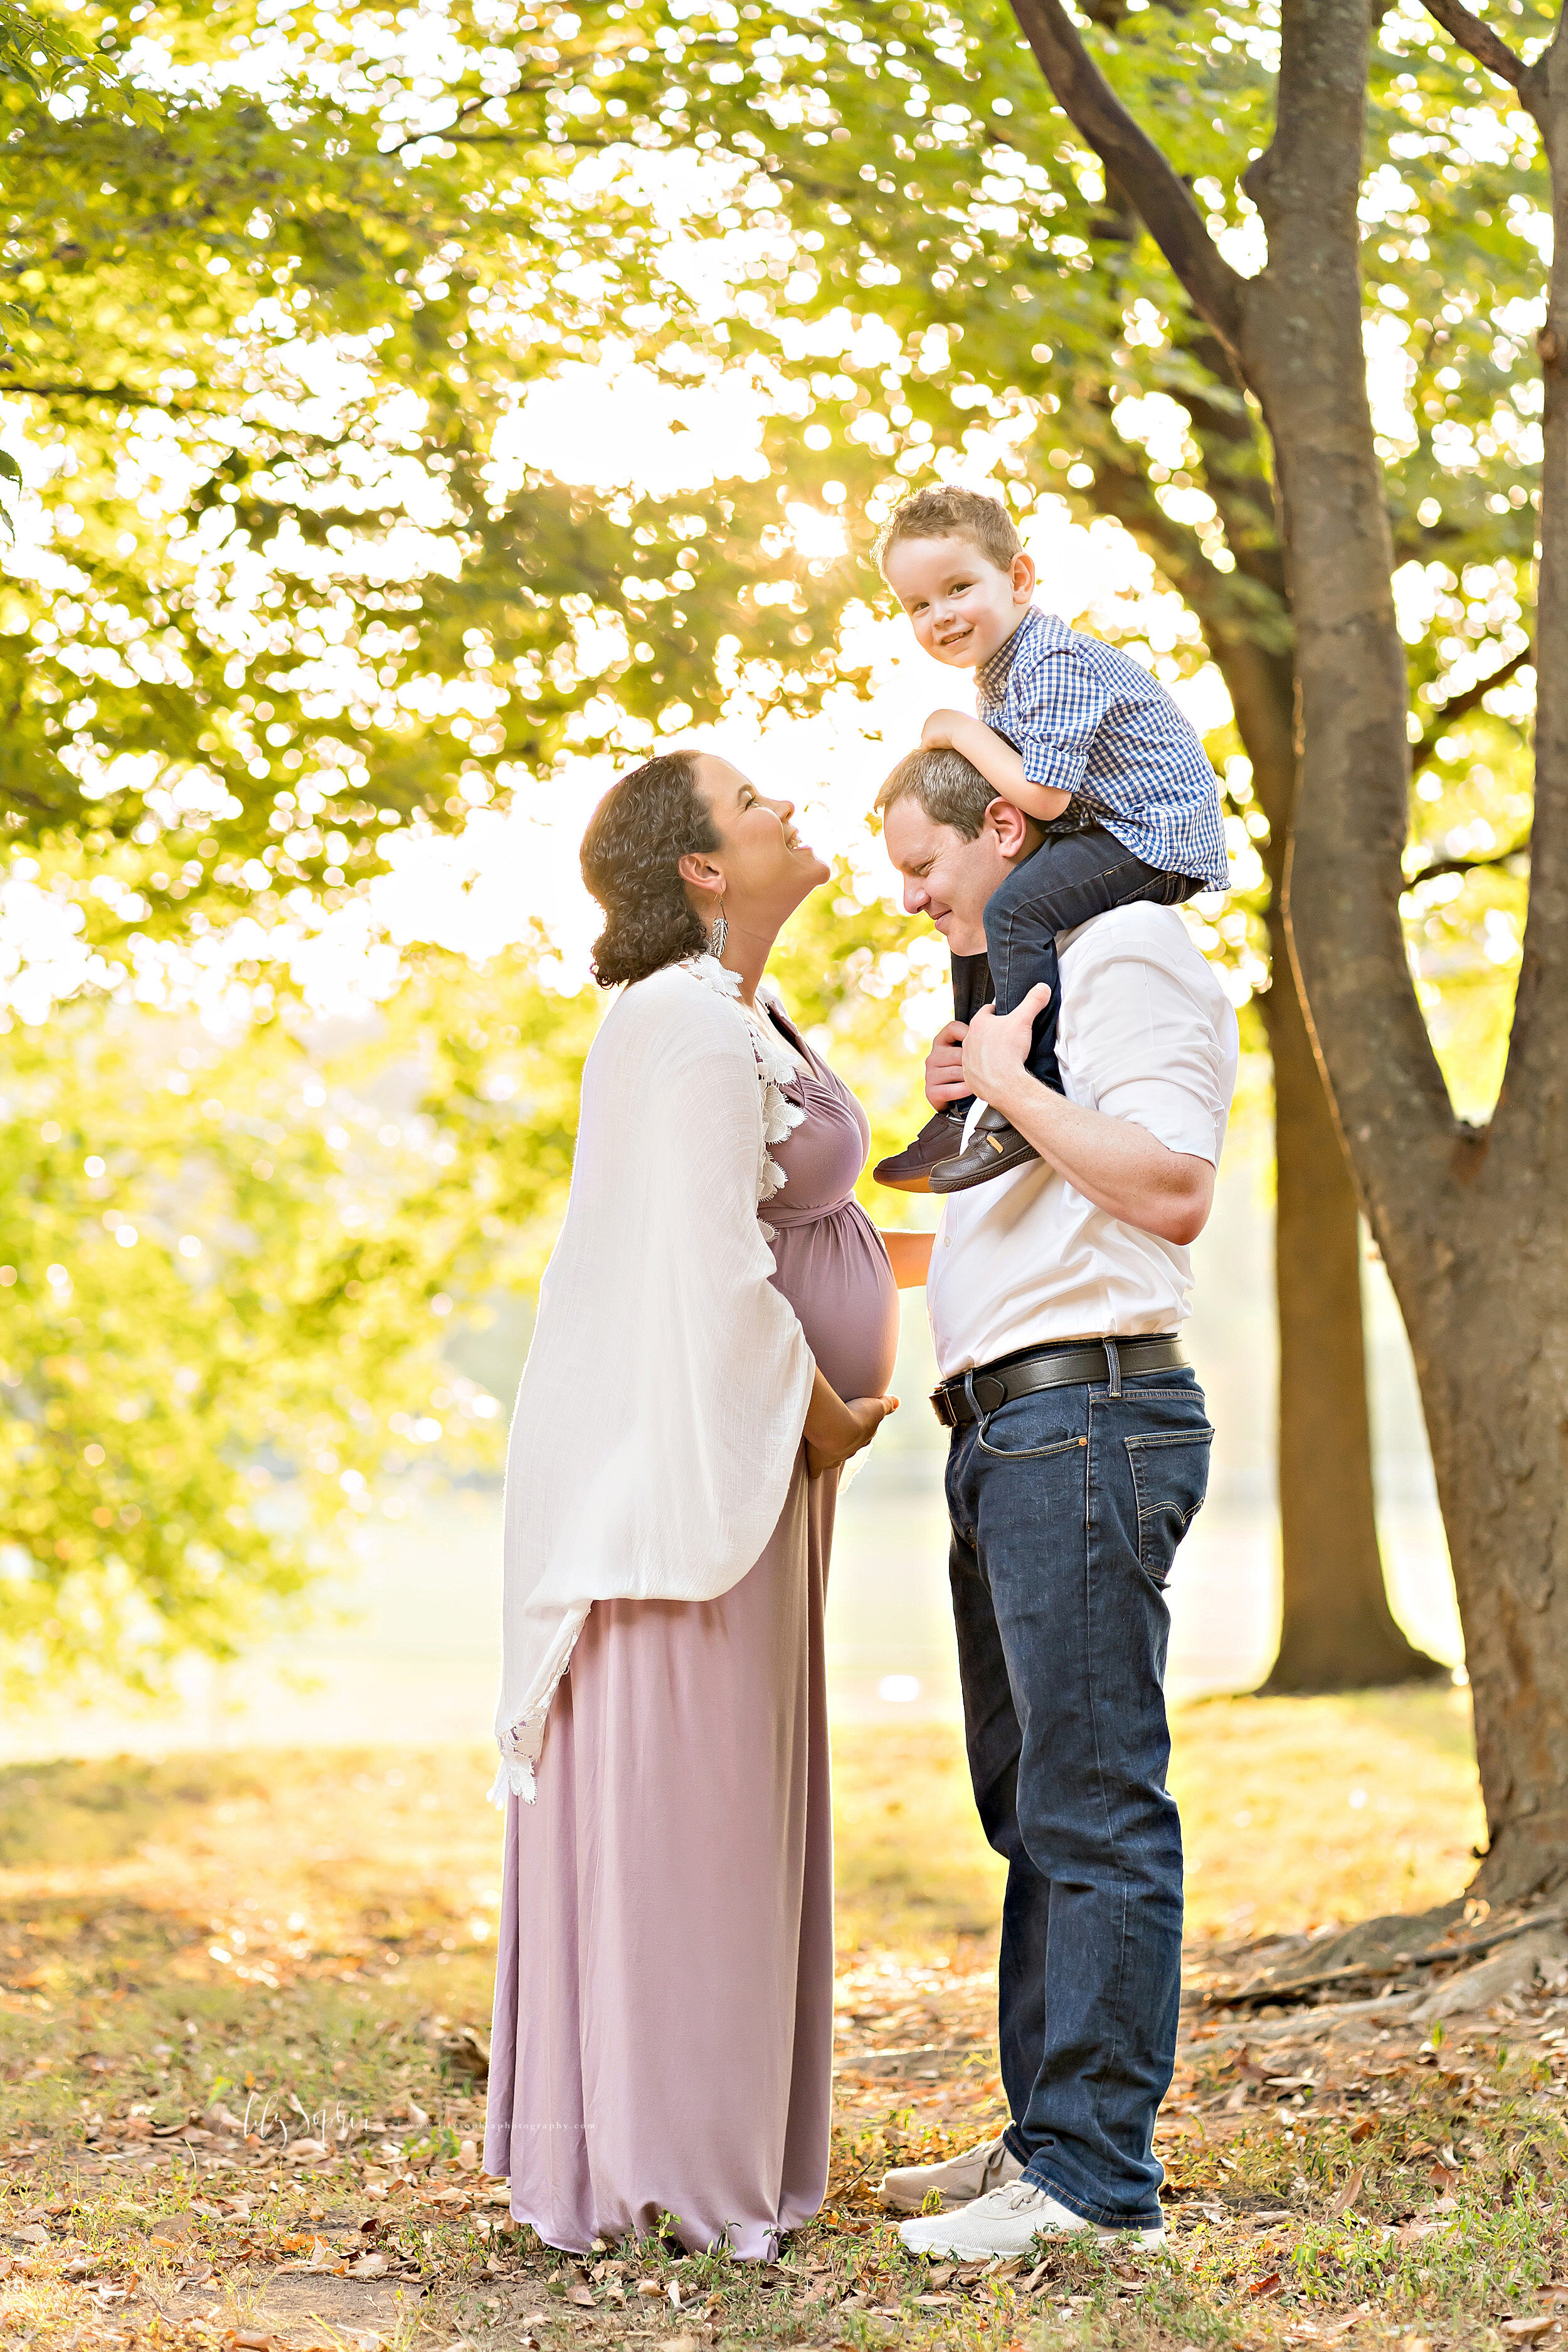  Family photo of three with expectant mom, dad, and toddler son taken in an Atlanta park at sunset as pregnant mom faces dad who has their toddler son on his shoulders. 